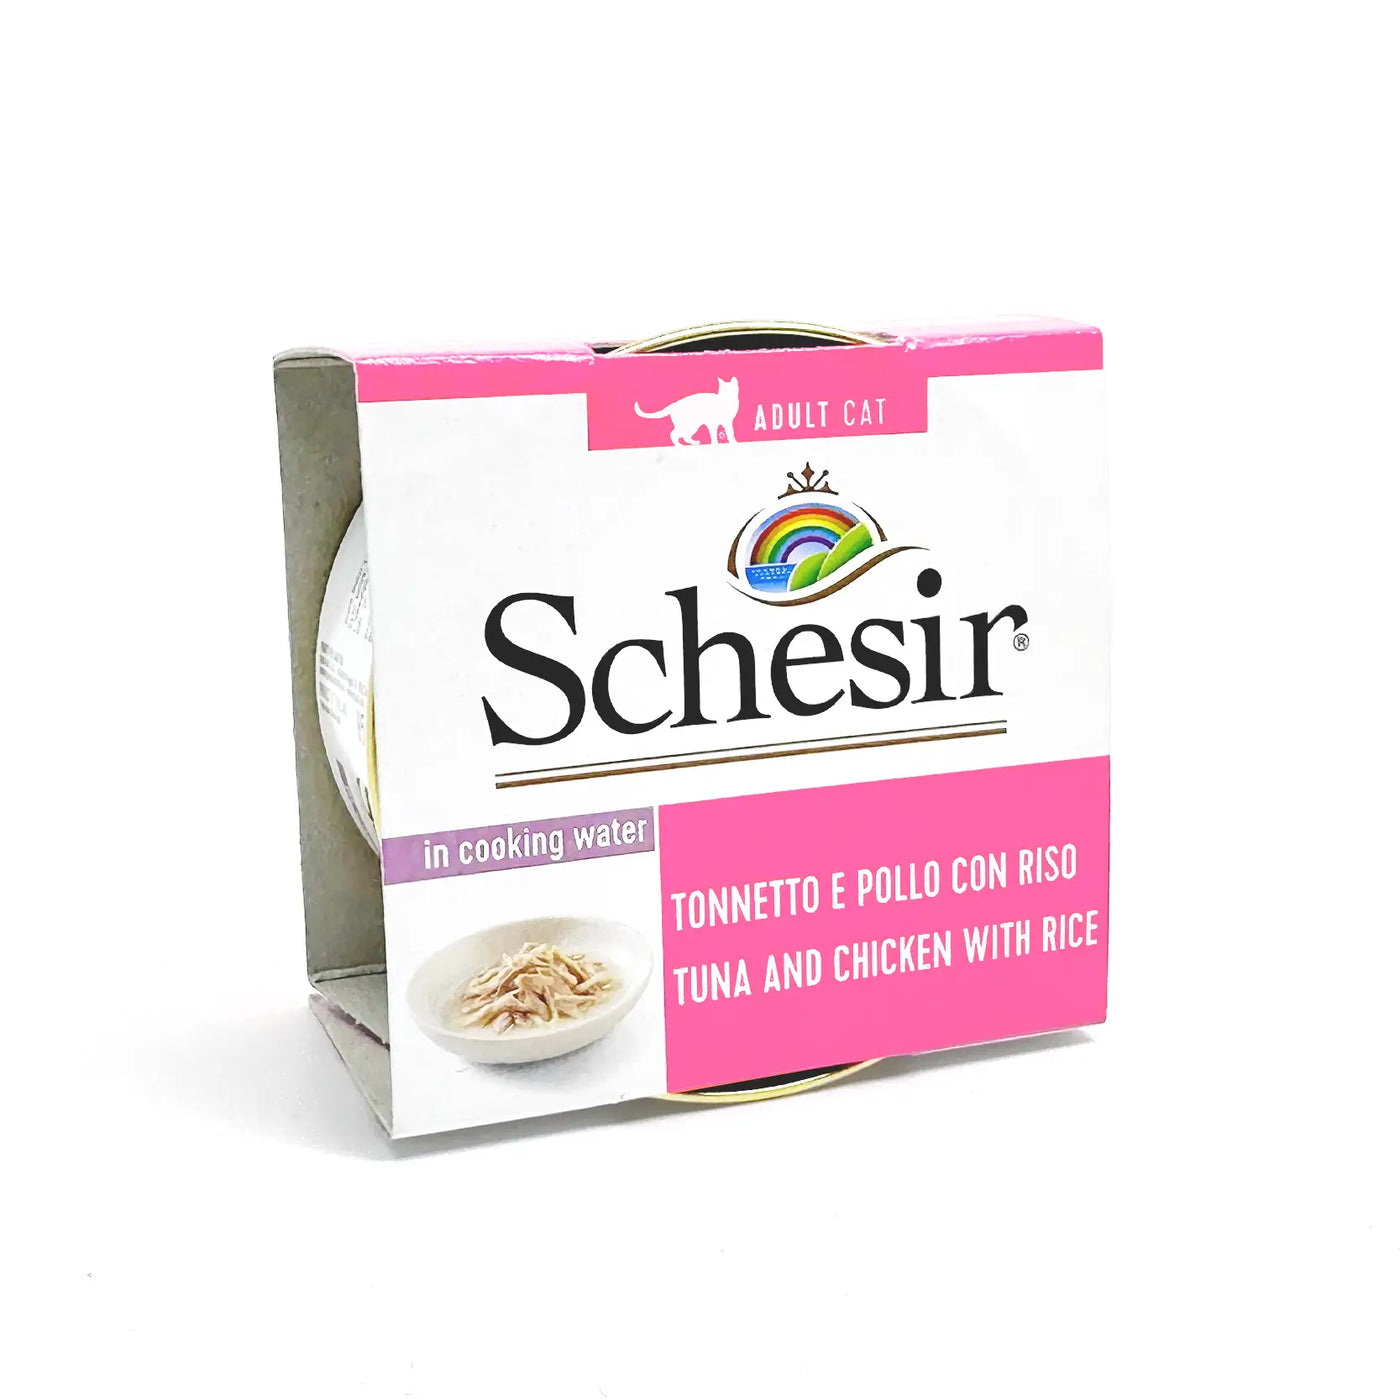 Schesir - Complete Wet Food for Adult Cats - Tuna and Chicken with Rice in Cooking Water 